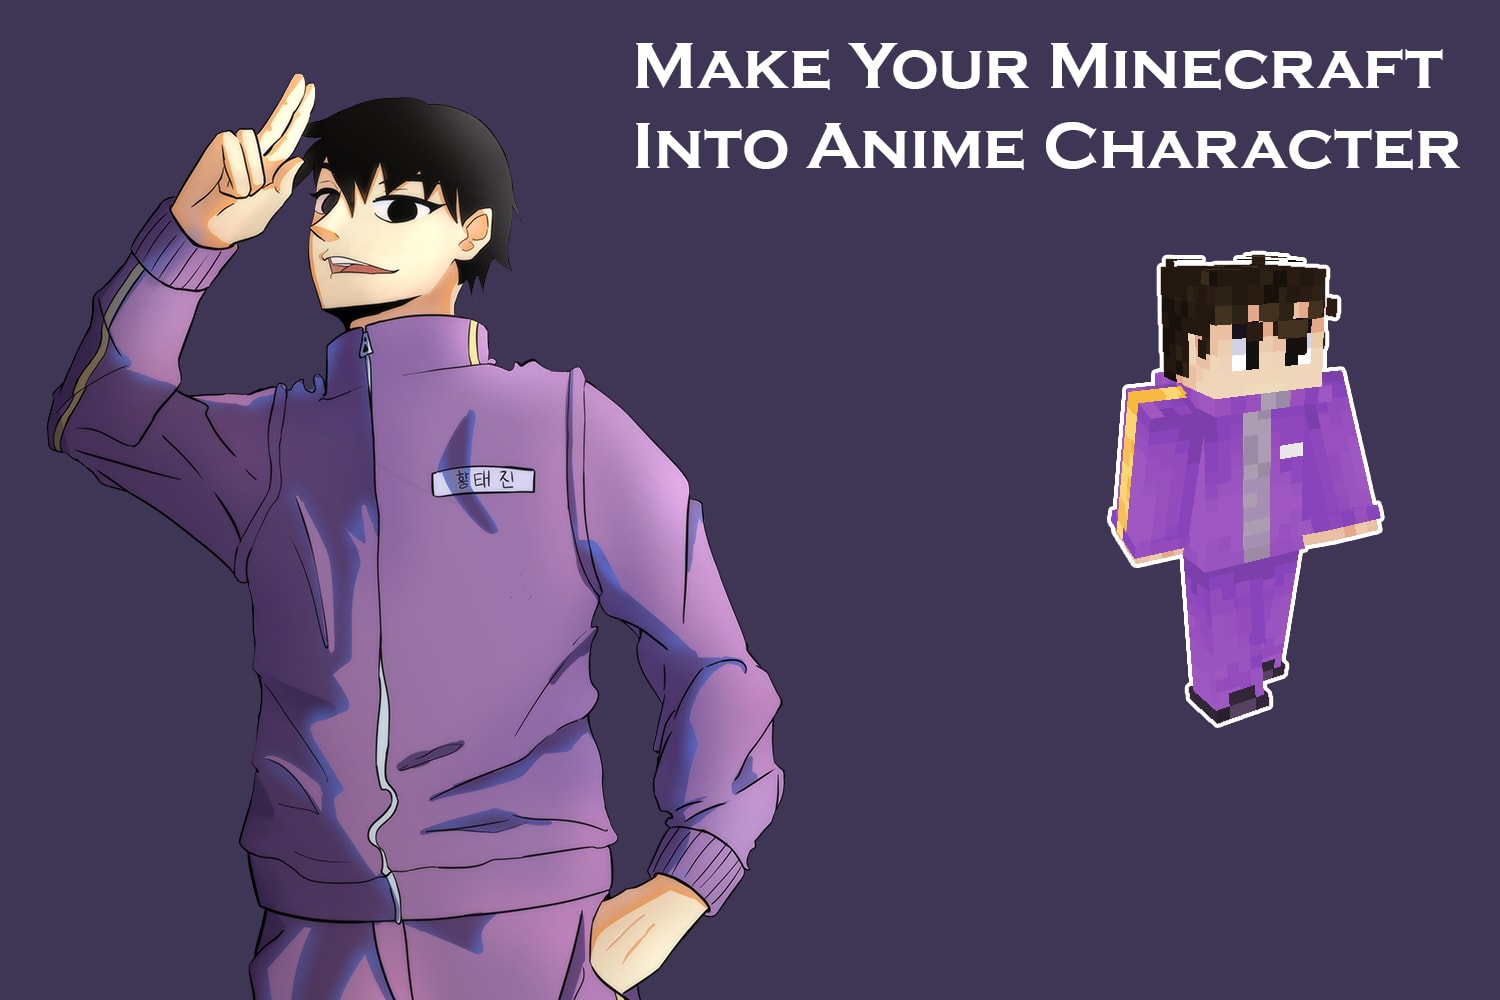 draw your roblox avatar as an anime style character